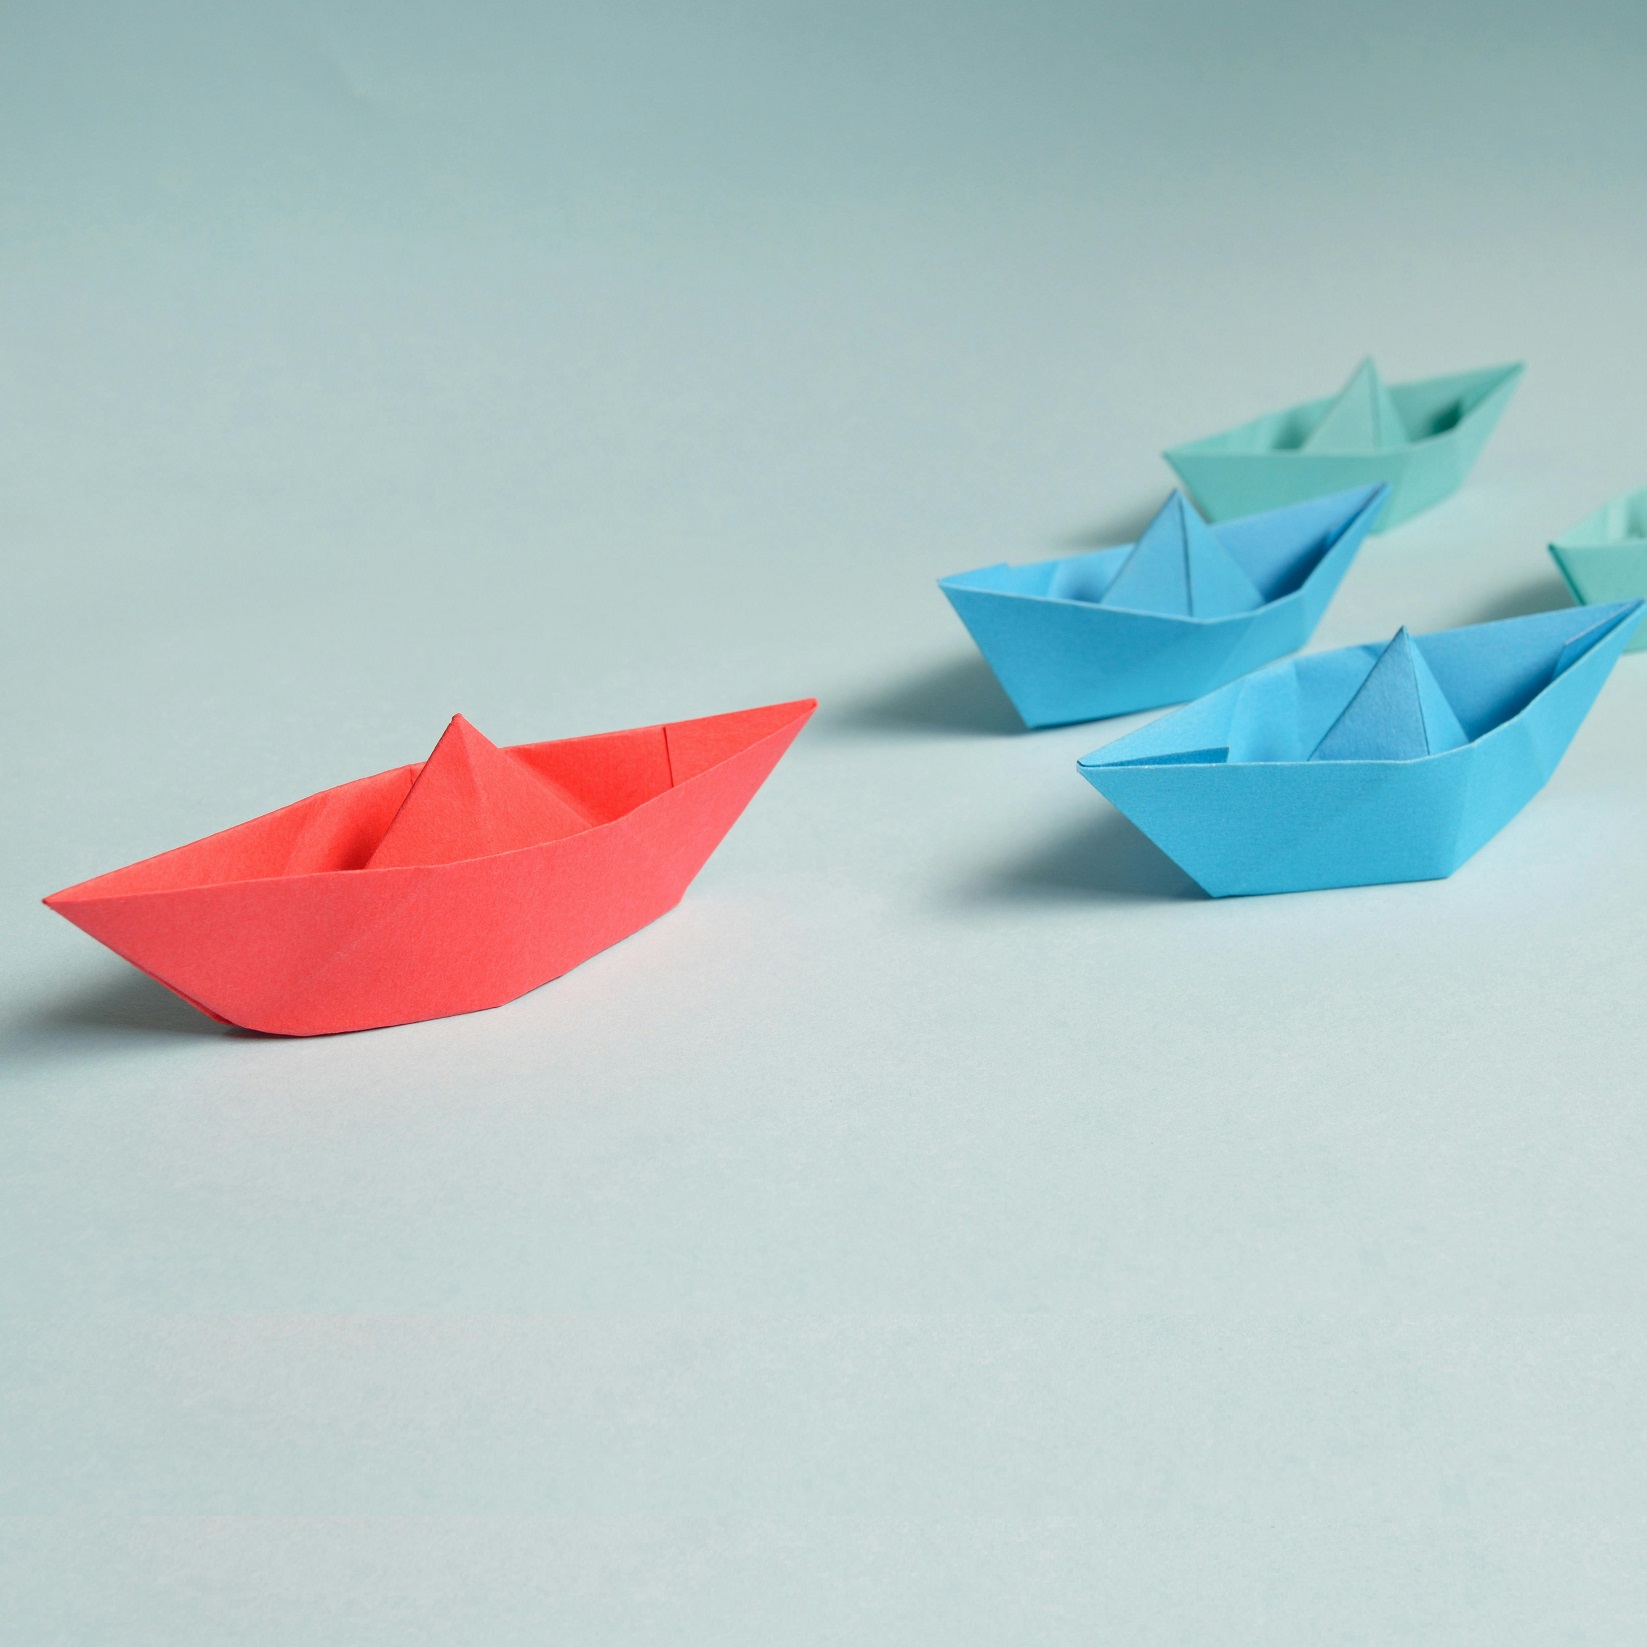 Red paper boat leading blue paper boats